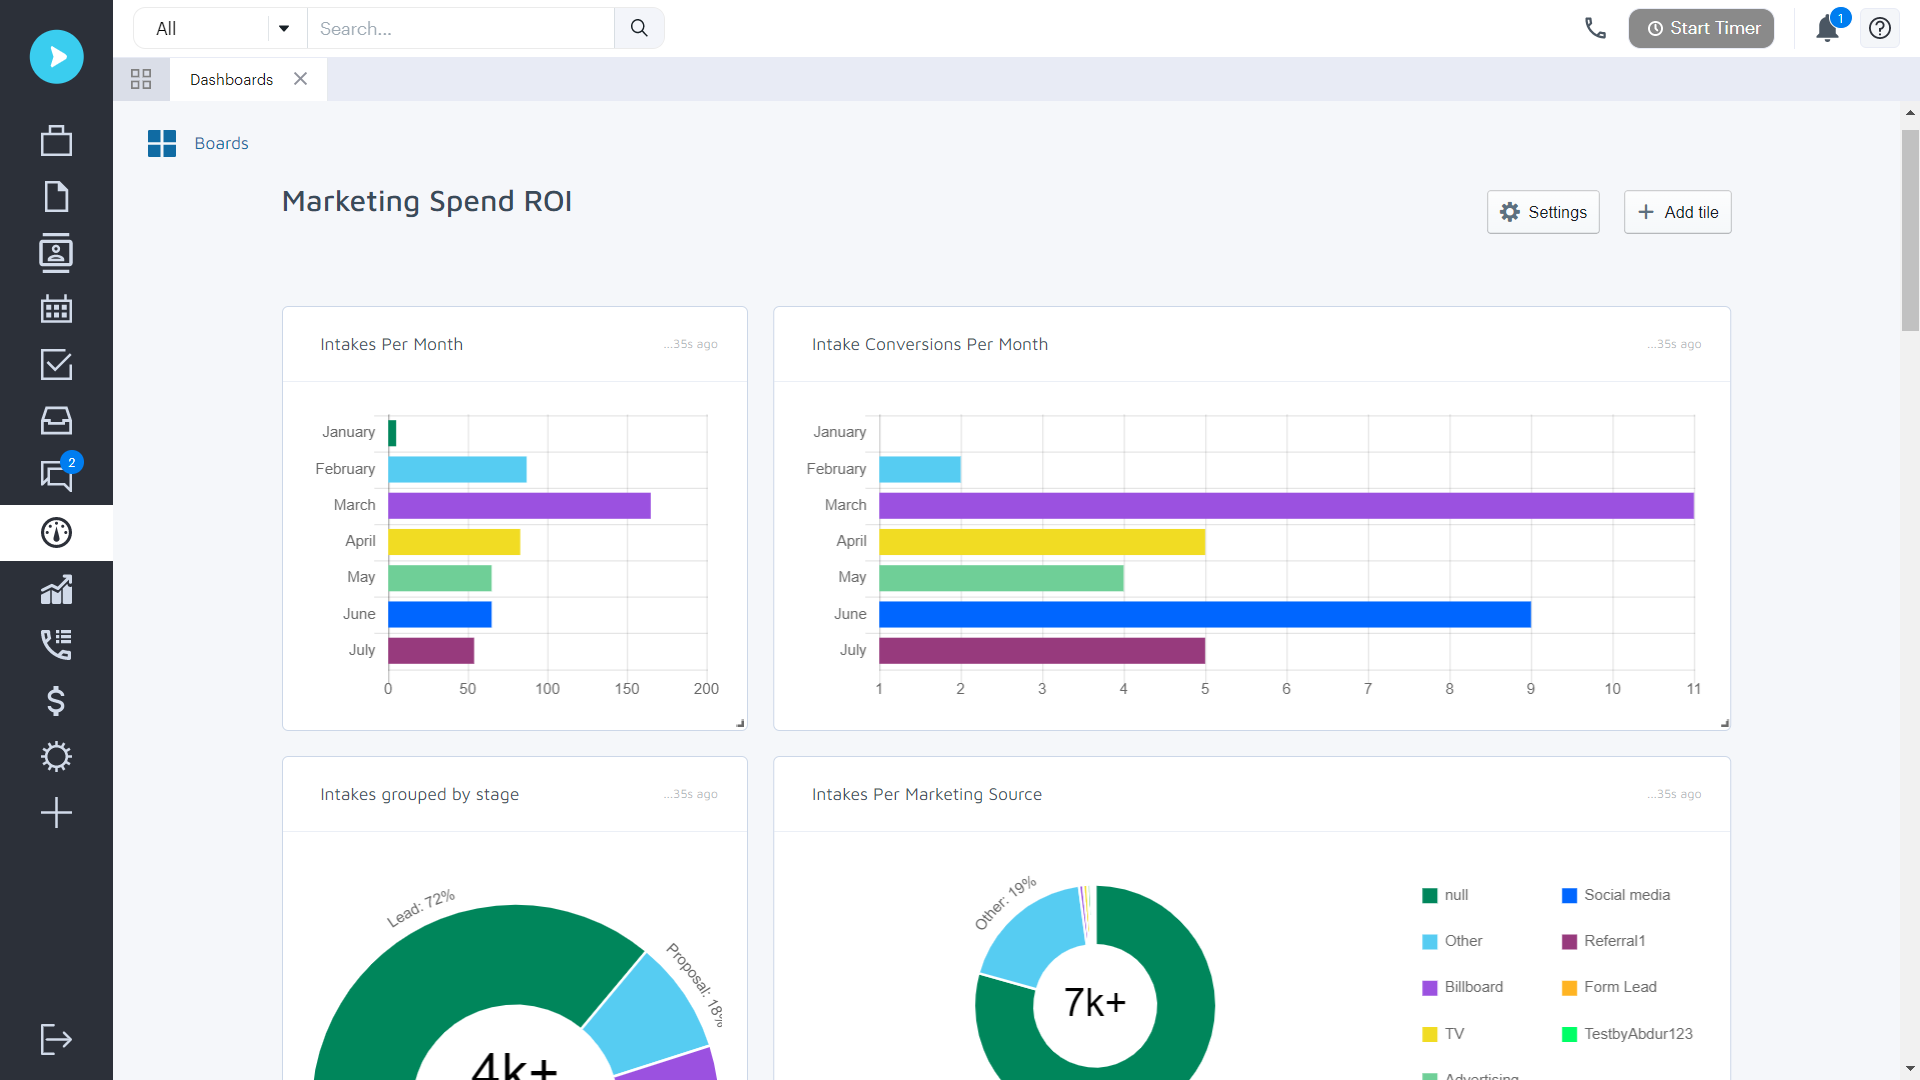 Neos personal injury case management software dashboard displaying marketing spend ROI